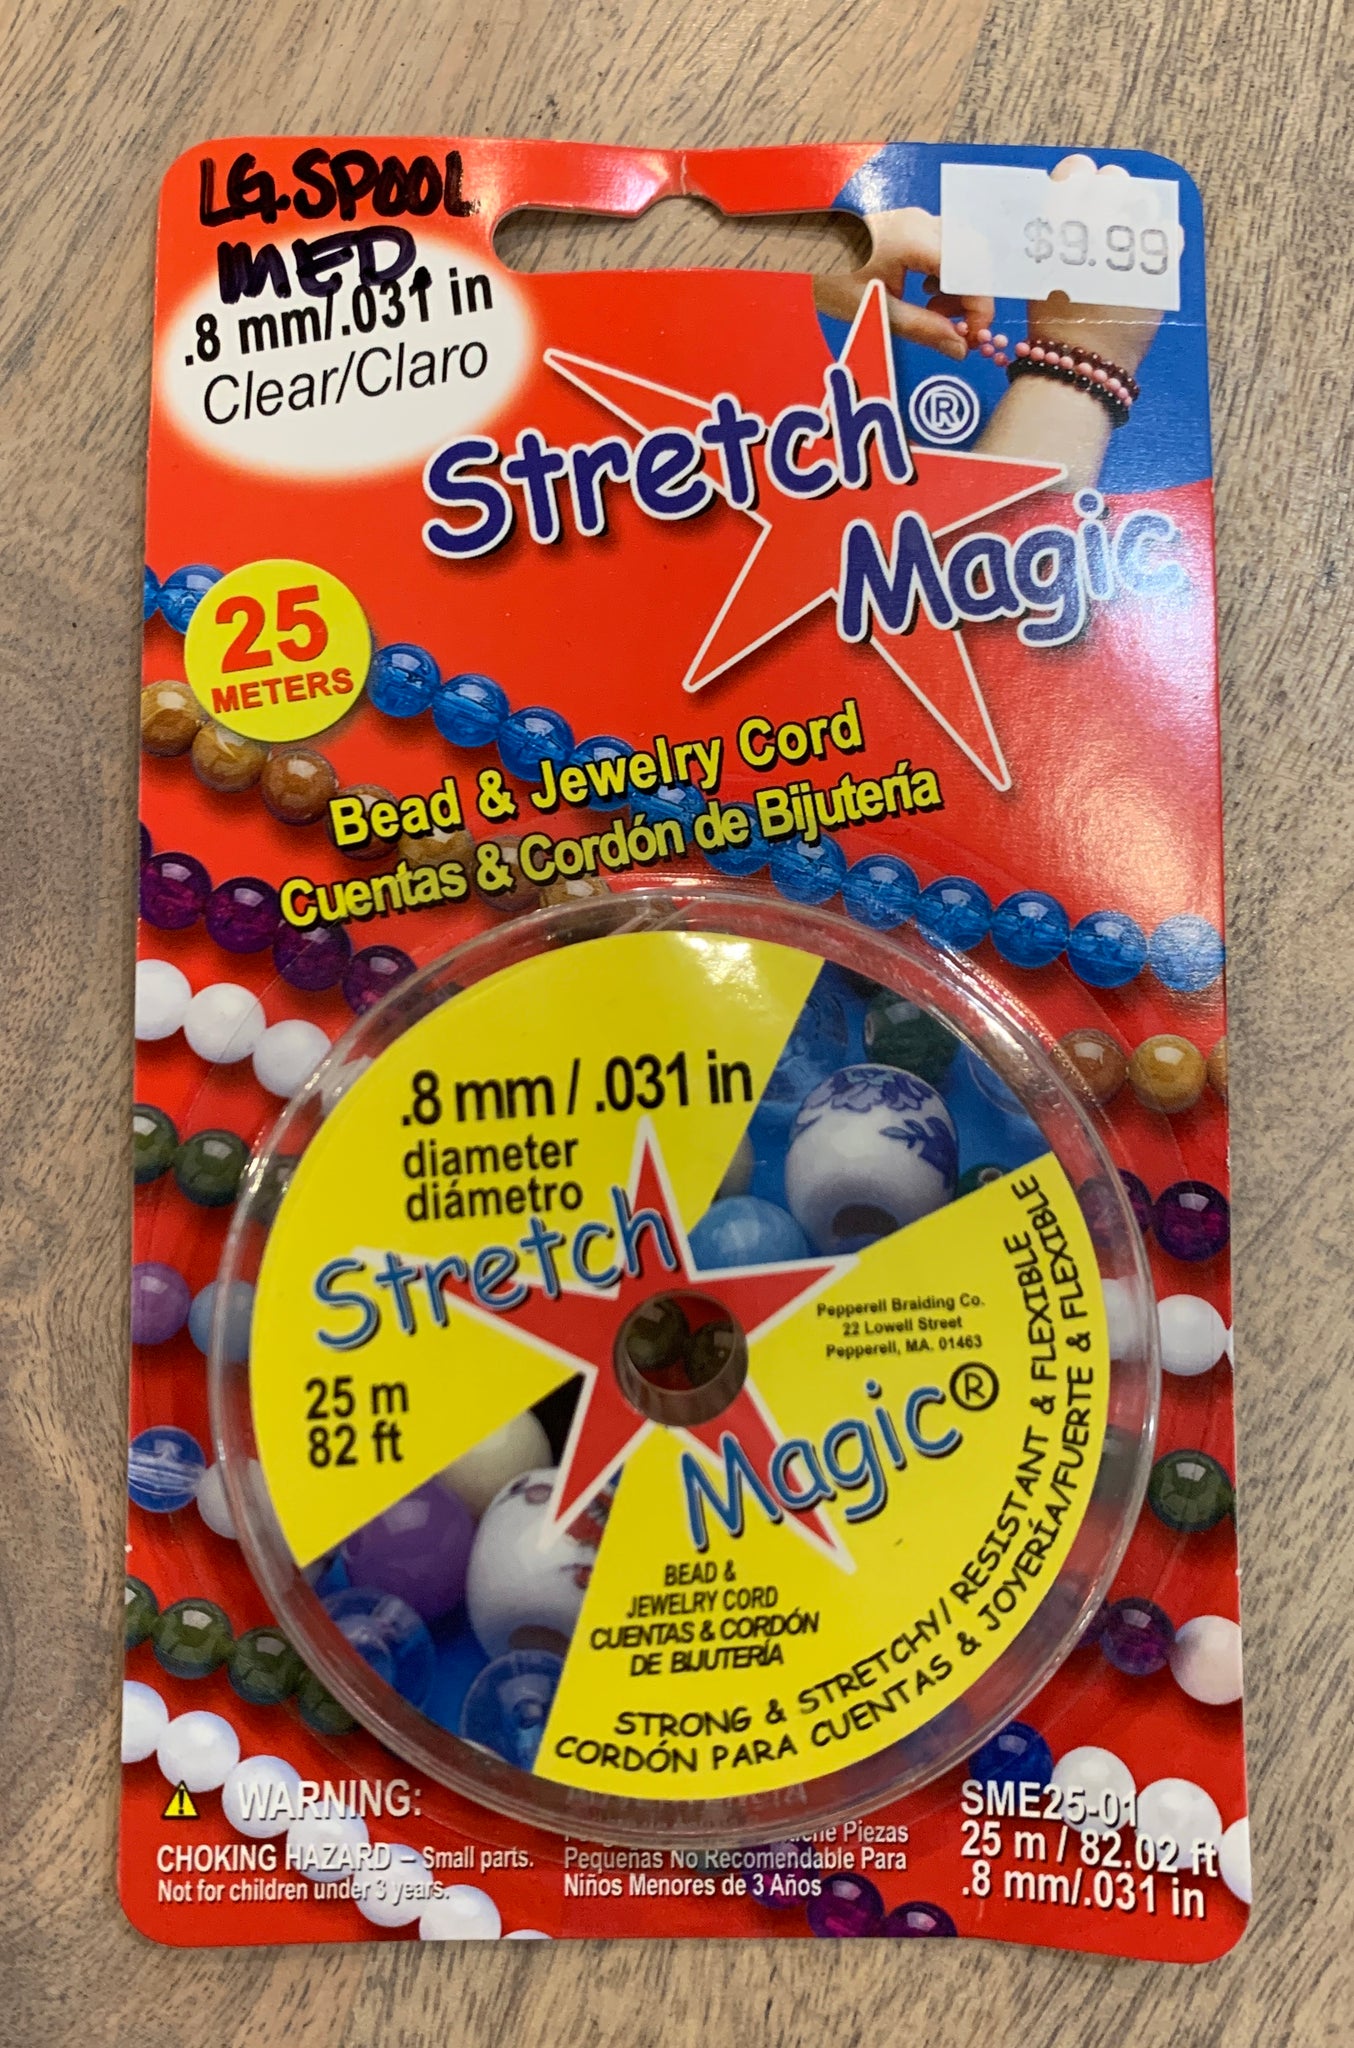 Stretch Magic 1mm Bead & Jewelry Cord 5Meters - Clear